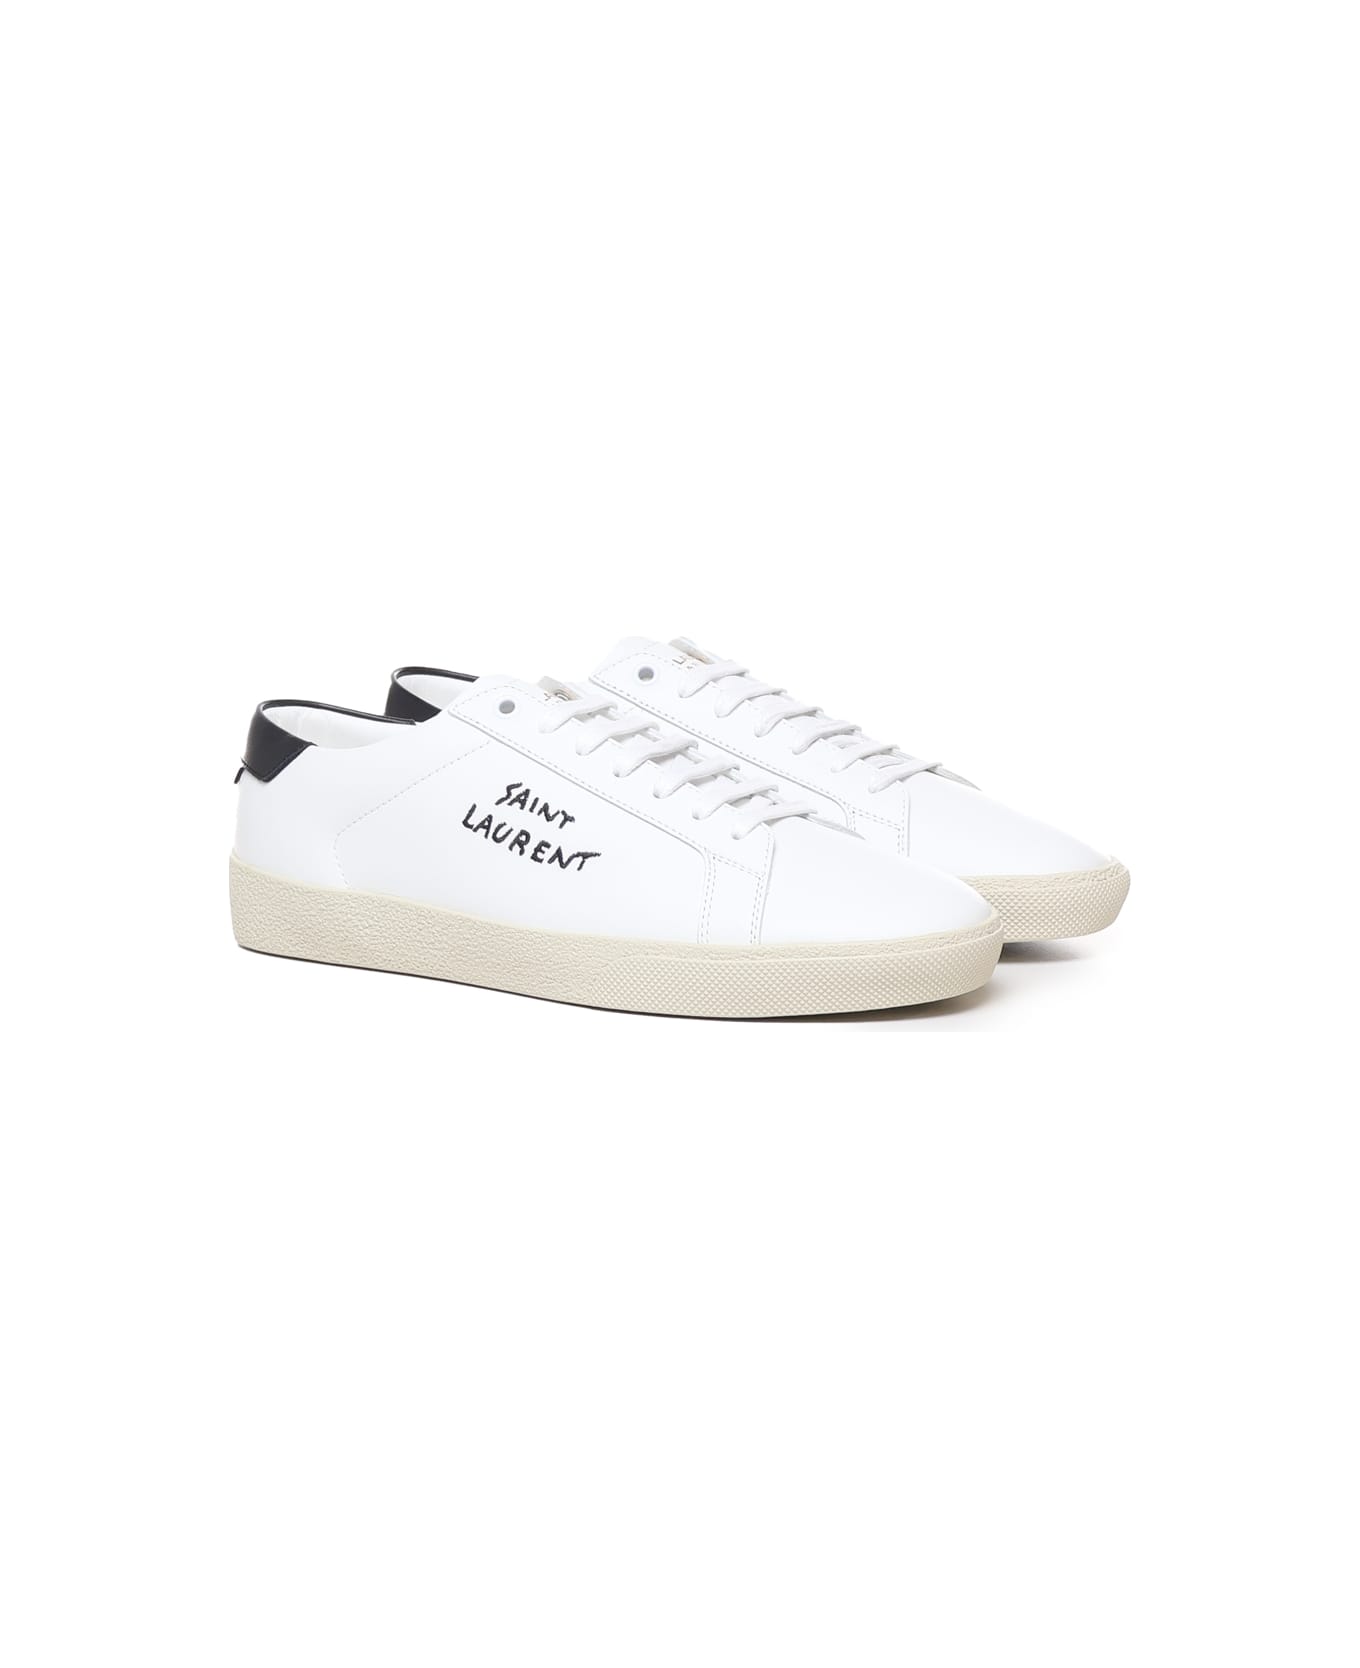 Saint Laurent Sneakers With Embroidery - White/black